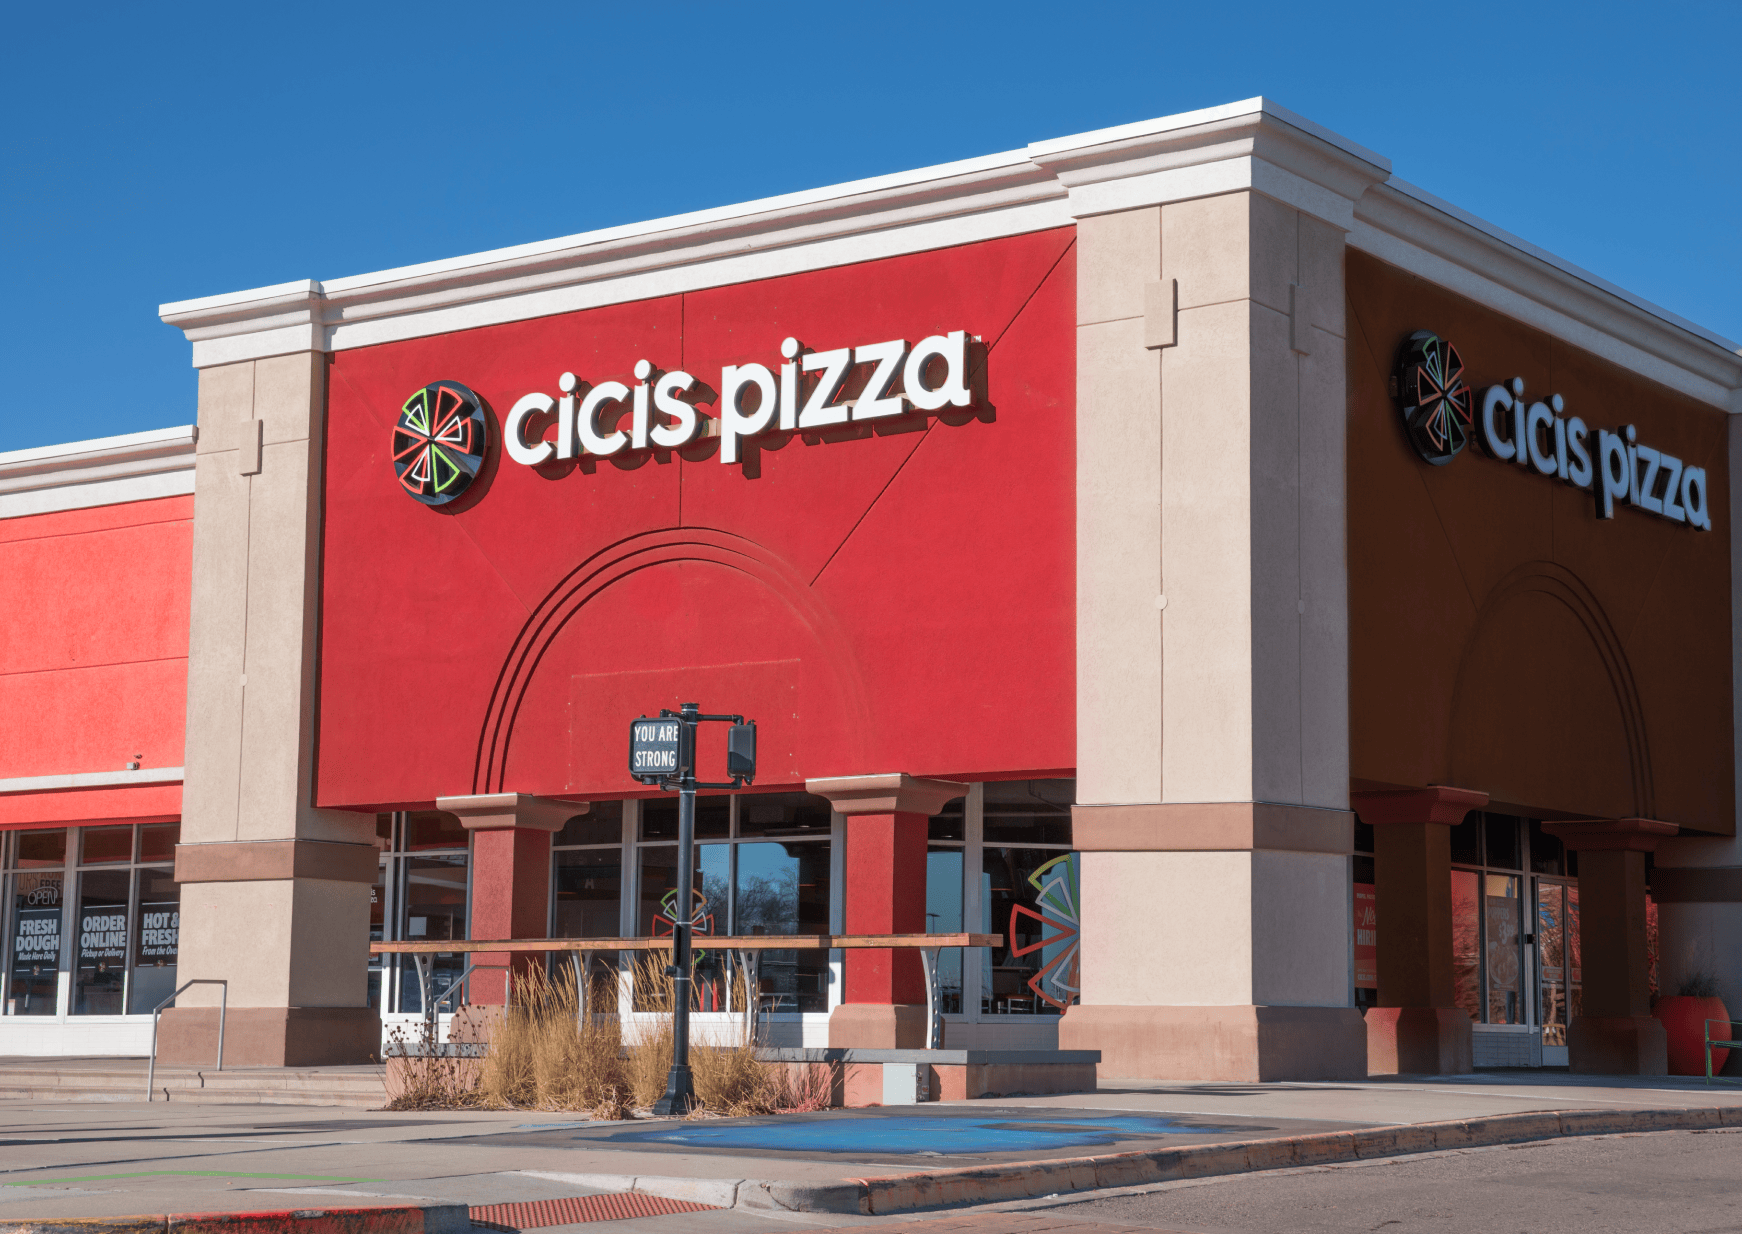 Exterior of a Cicis Pizza restaurant. The square two-story building is bright red with a 'Cicis Pizza' sign and pie spark logo over the two adjacent entrances.
